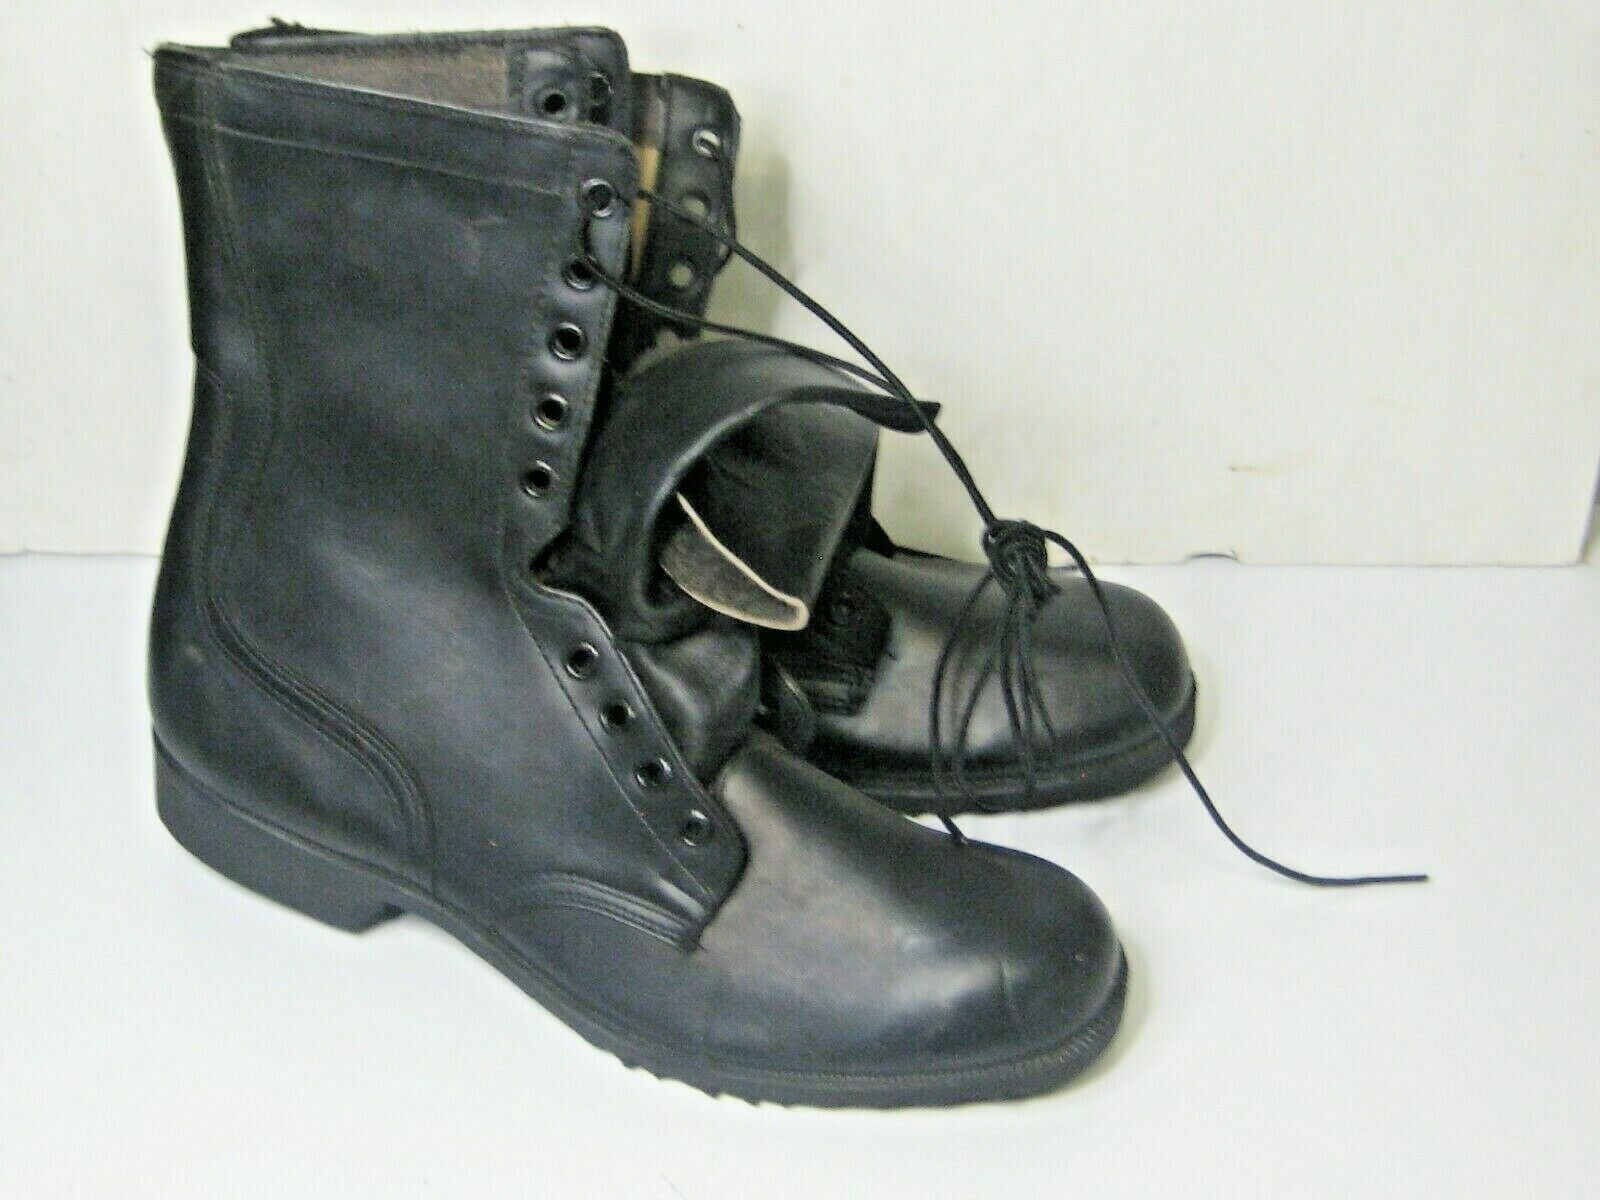 COMBAT BOOTS MARINES-ARMY ISSUE, BLACK LEATHER SIZE 13 NARROW, BRAND ...